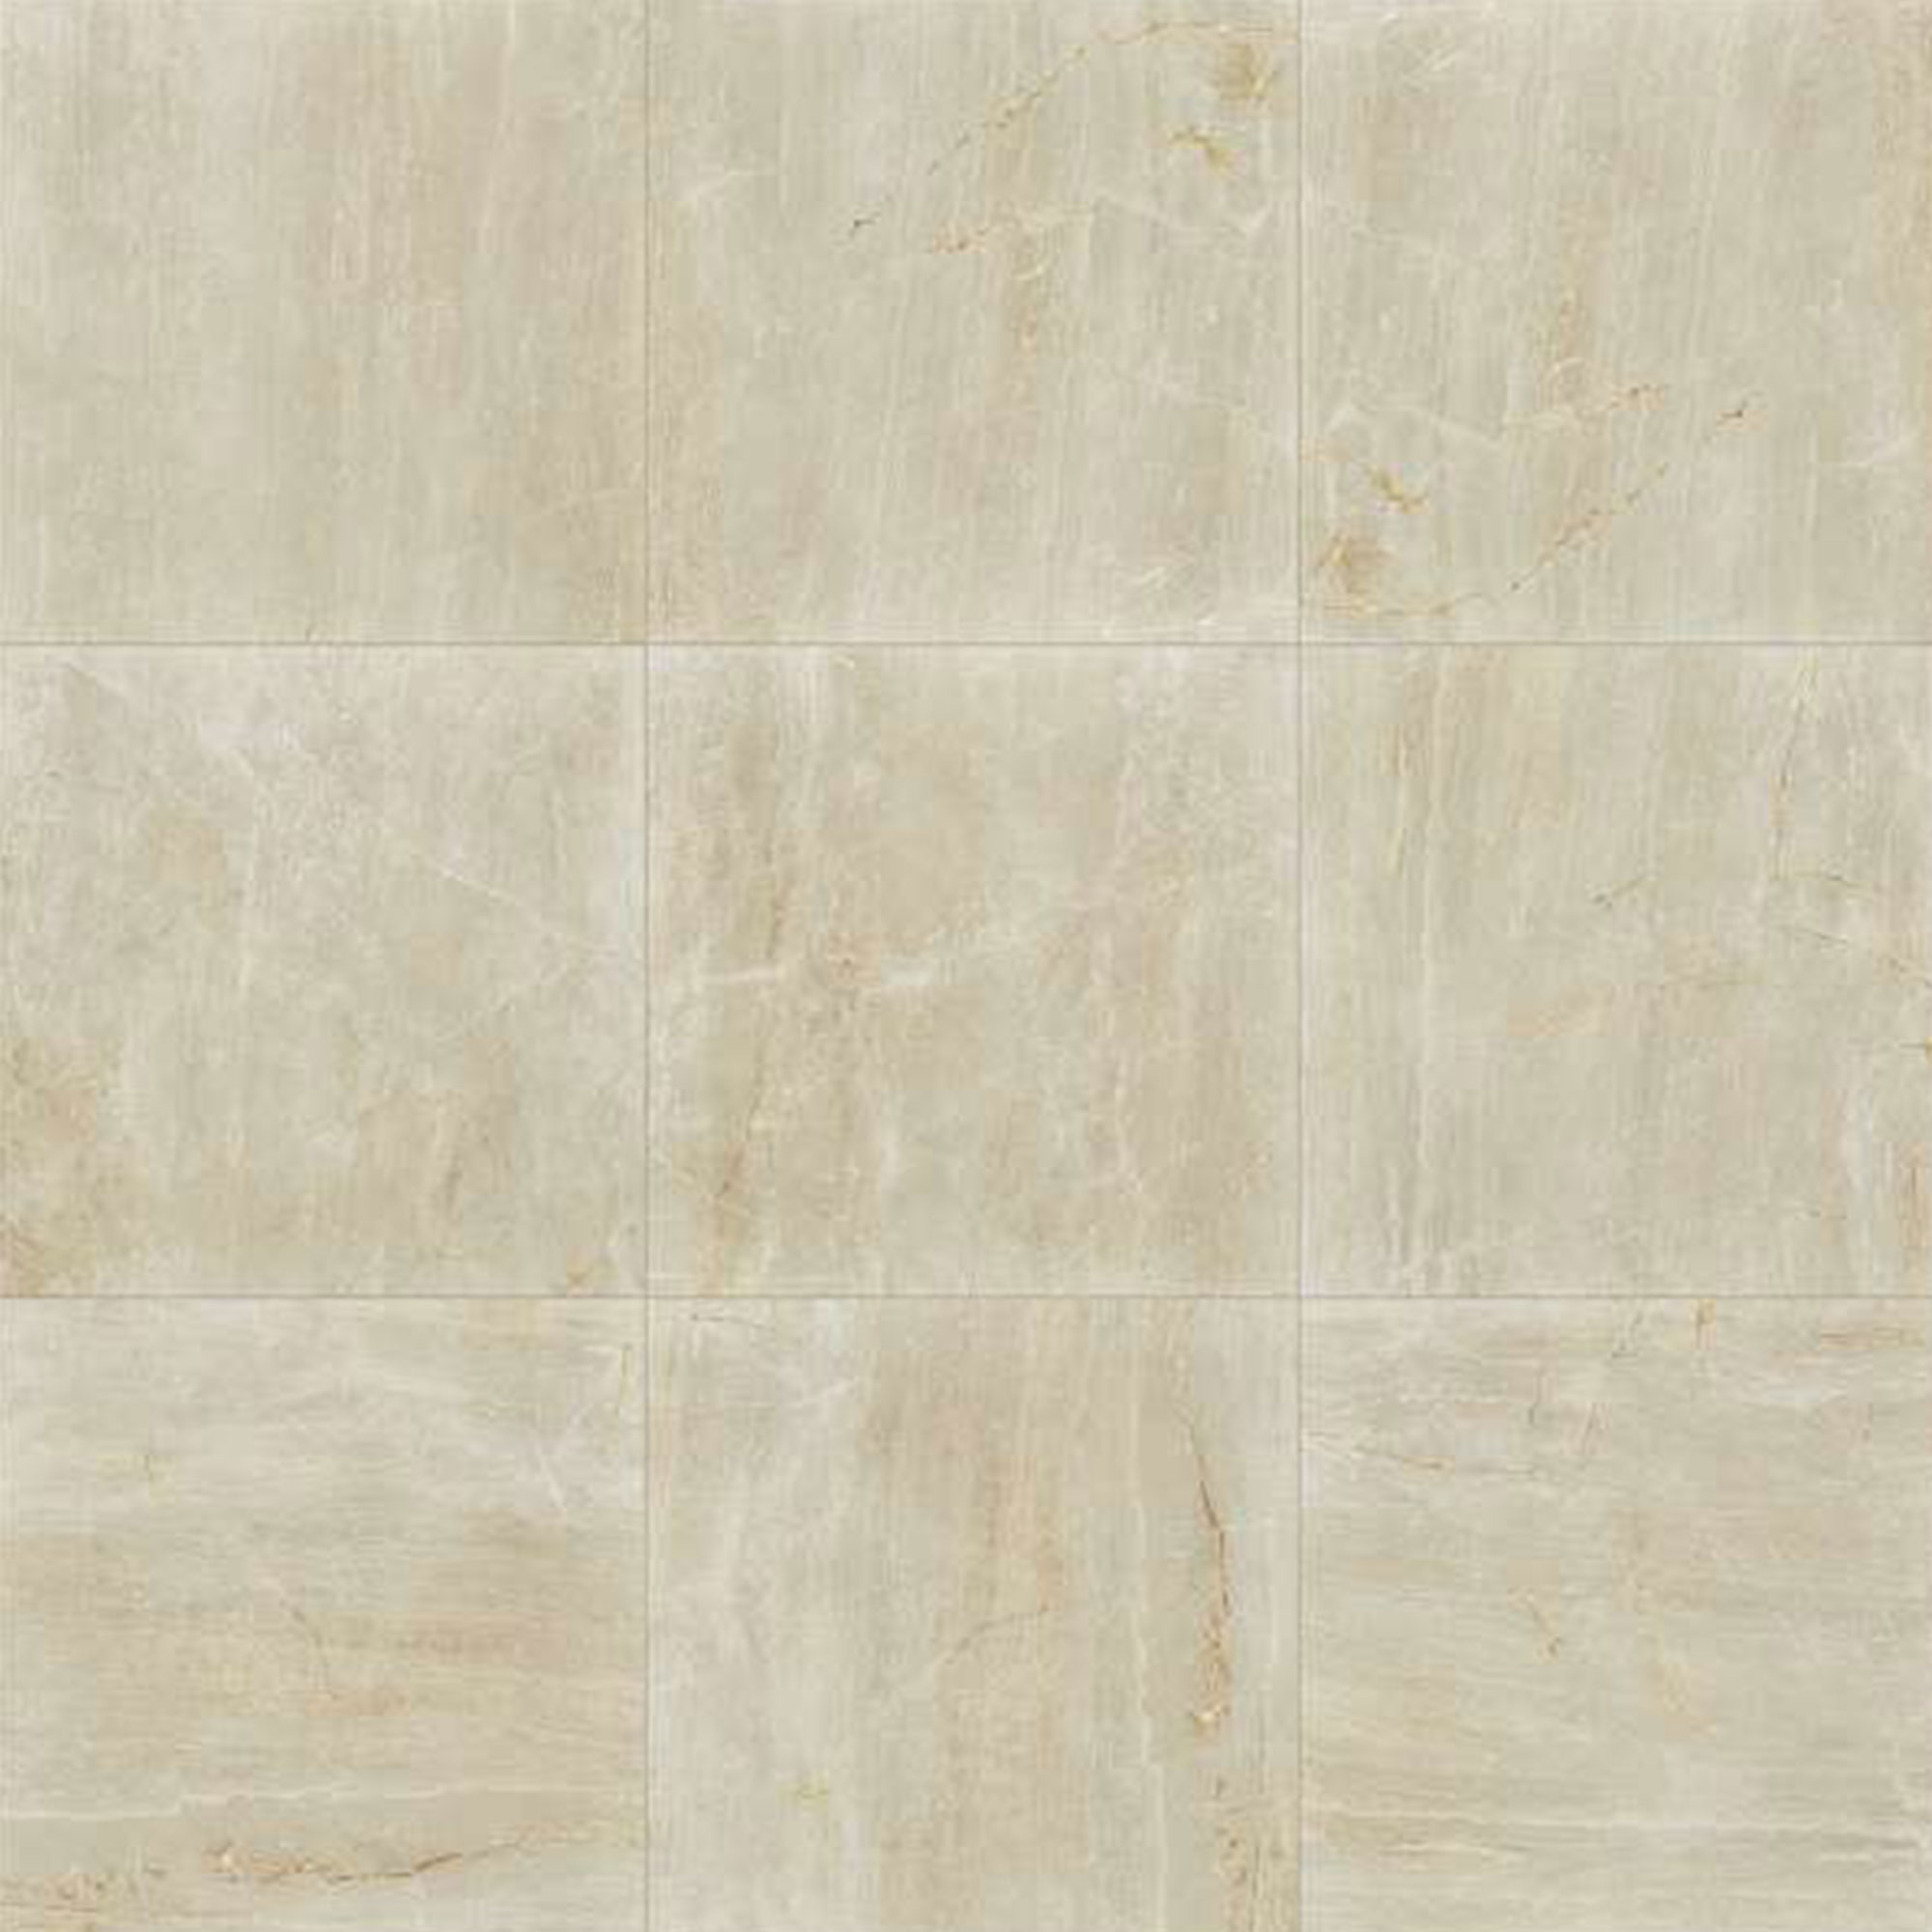 Shaw Floors Fossil 24 x 24 Matte Creme